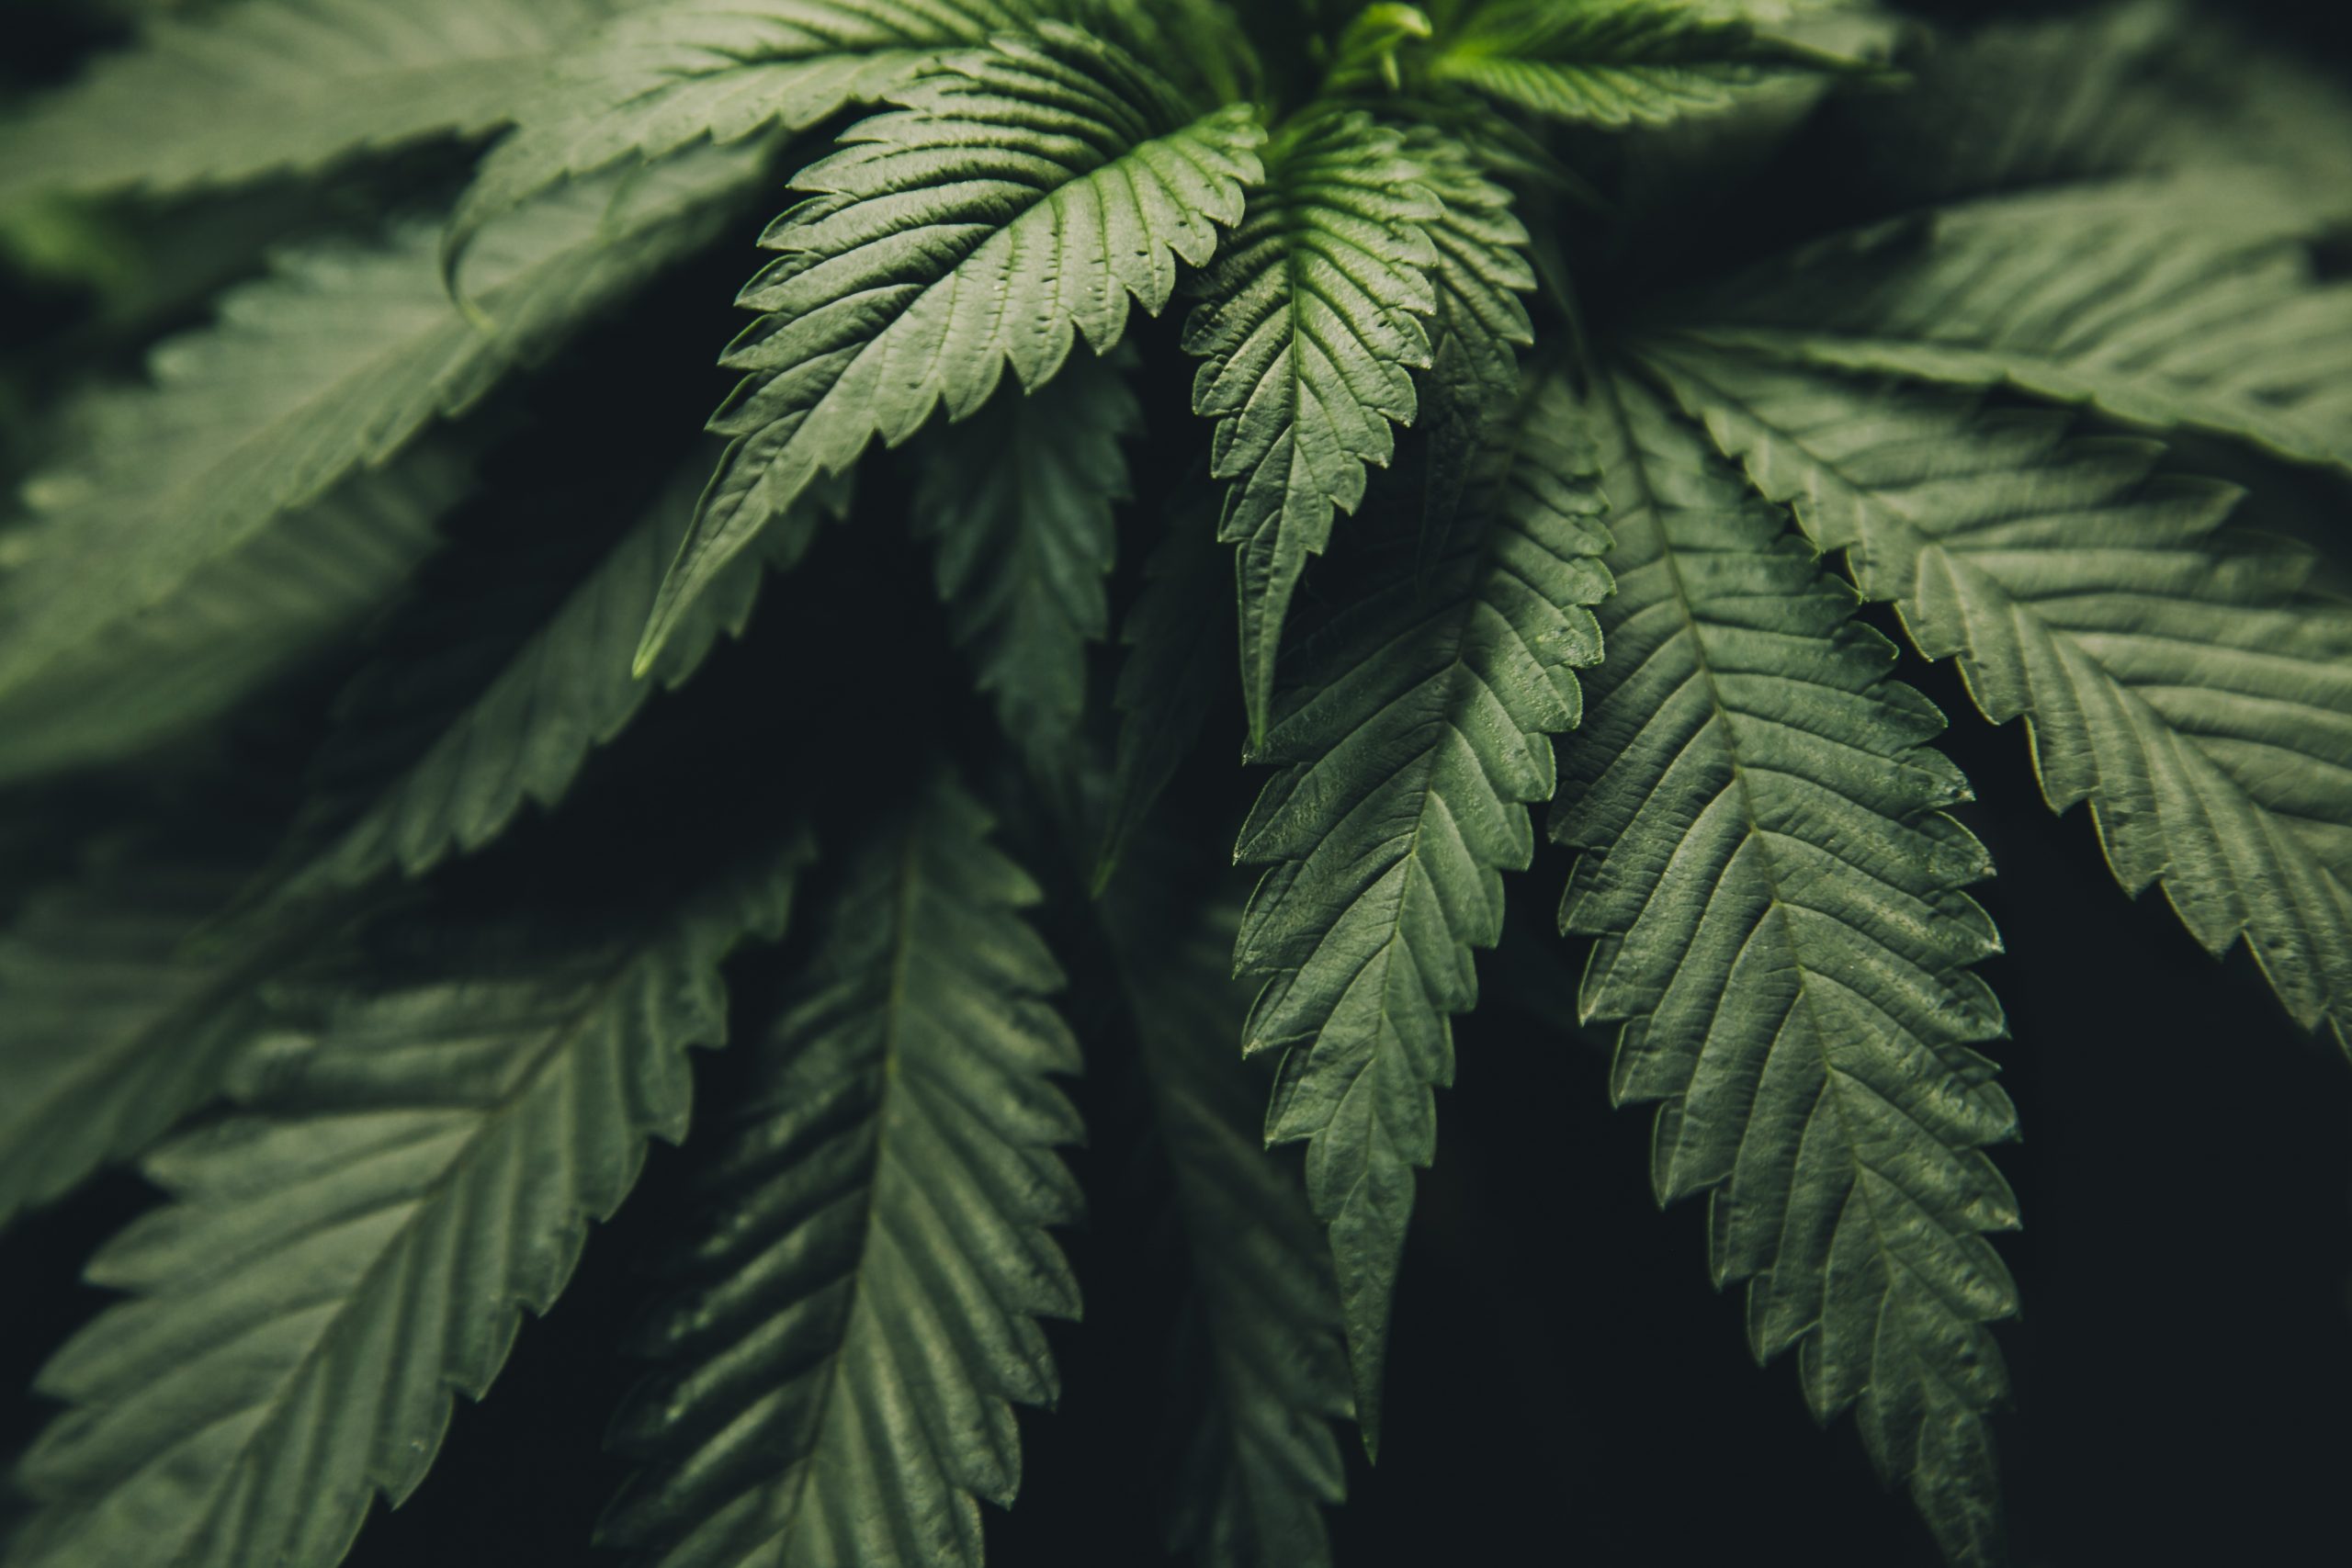 Where can operators receive reliable cannabis banking help